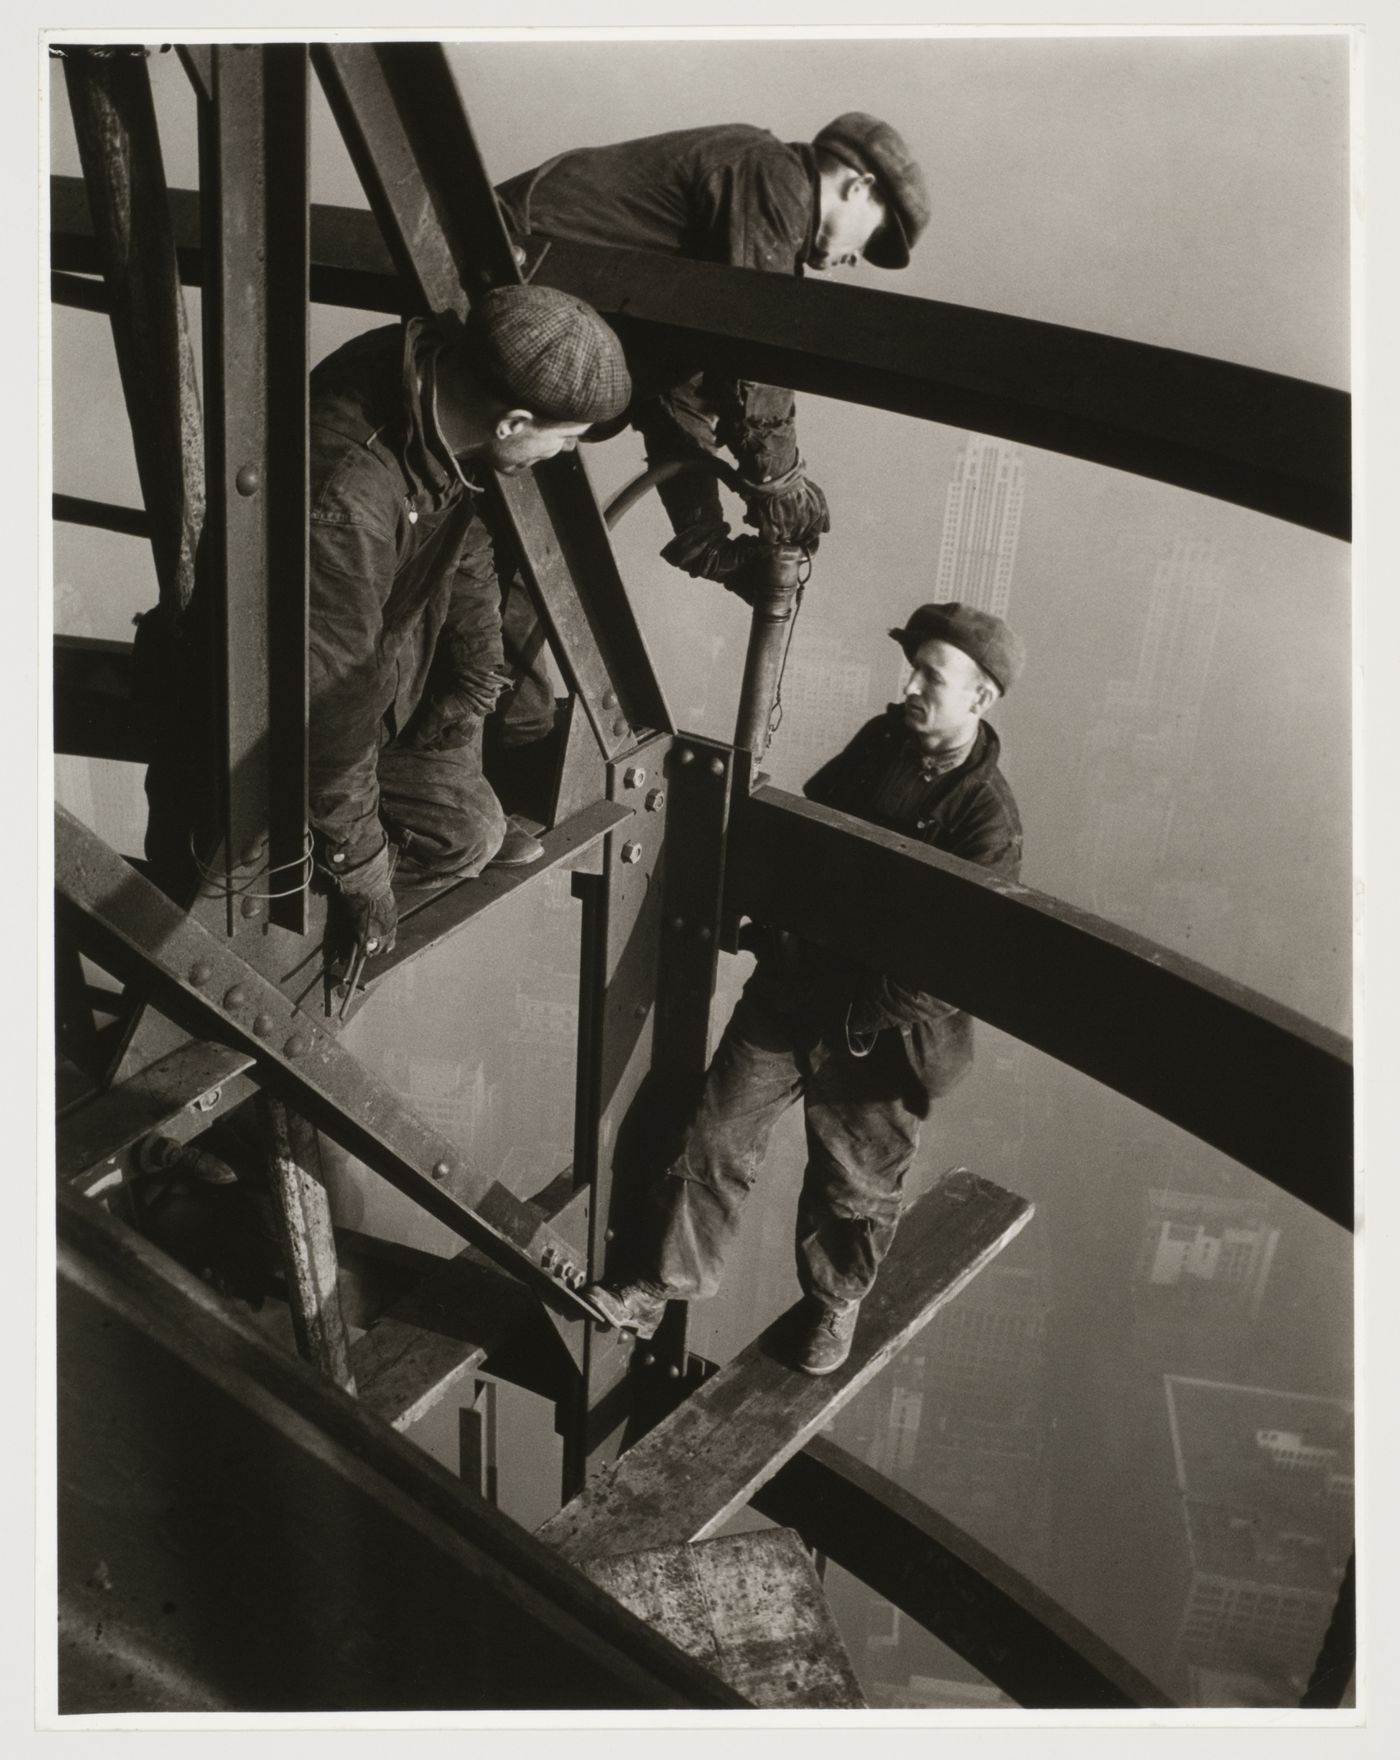 Riveters working on mooring mast, Empire State Building, New York City